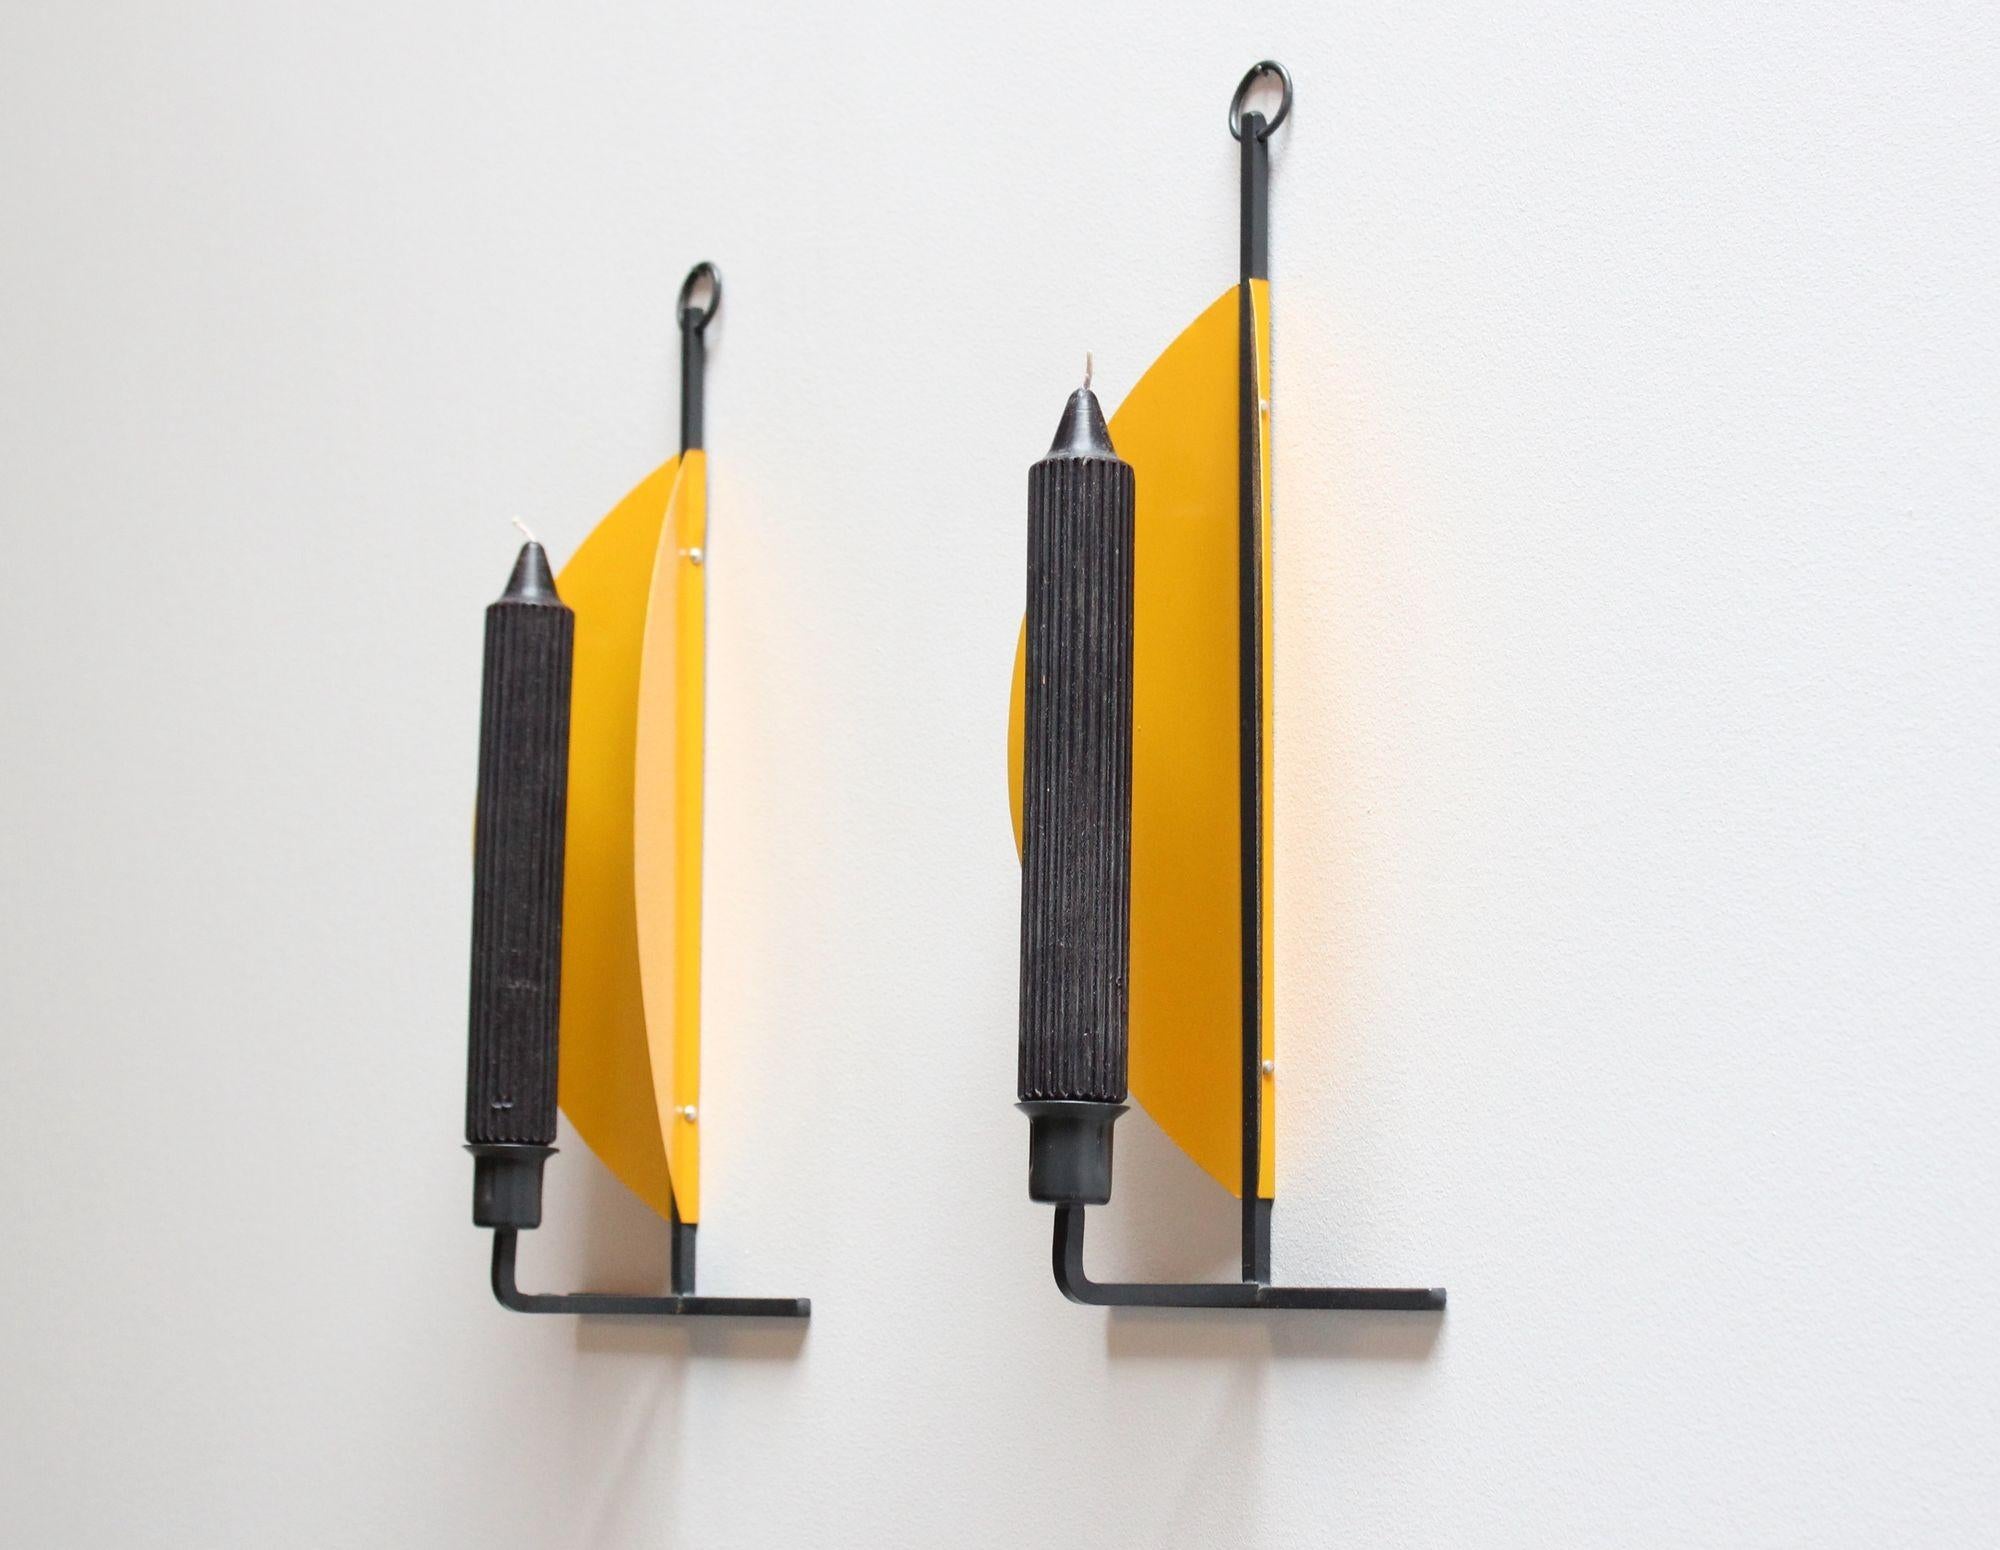 Stylish, modernist candle scones (ca. 1960s/1970s, Denmark). Composed of vibrant yellow semi-circular discs mounted to a charcoal metal stem at an angle to give the appearance of cradling the candle and better containing the light they emit.
Each